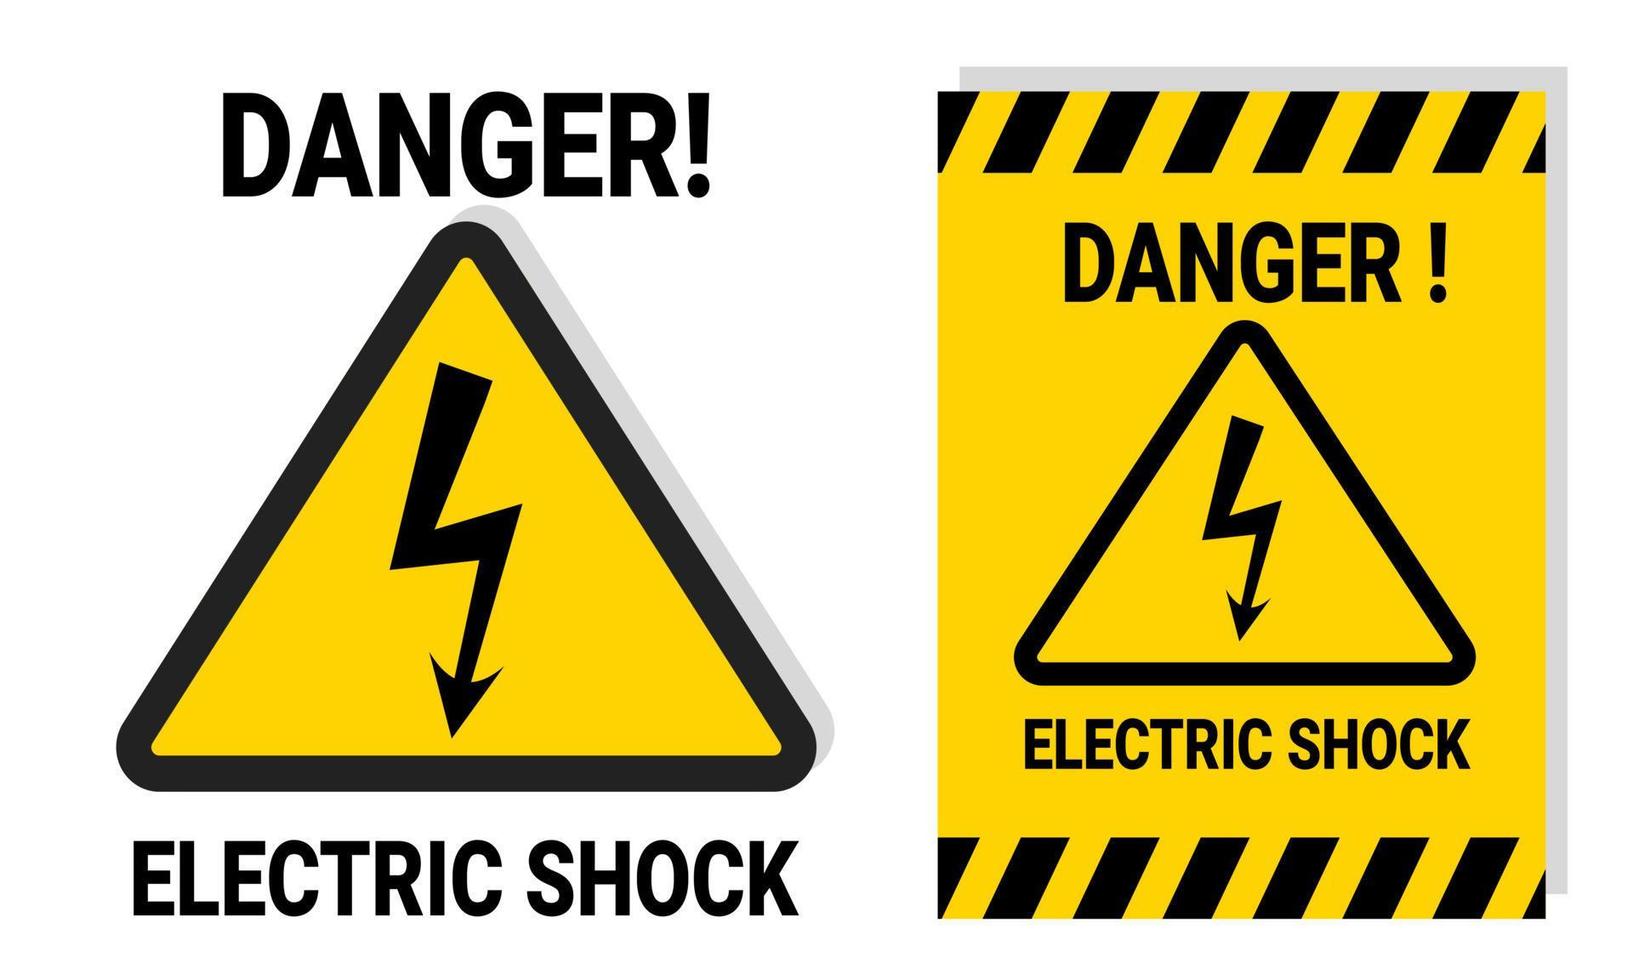 Electric shock hazard warning sign for work or laboratory safety with printable yellow sticker label for notice Danger. Vector illustration icon hazard